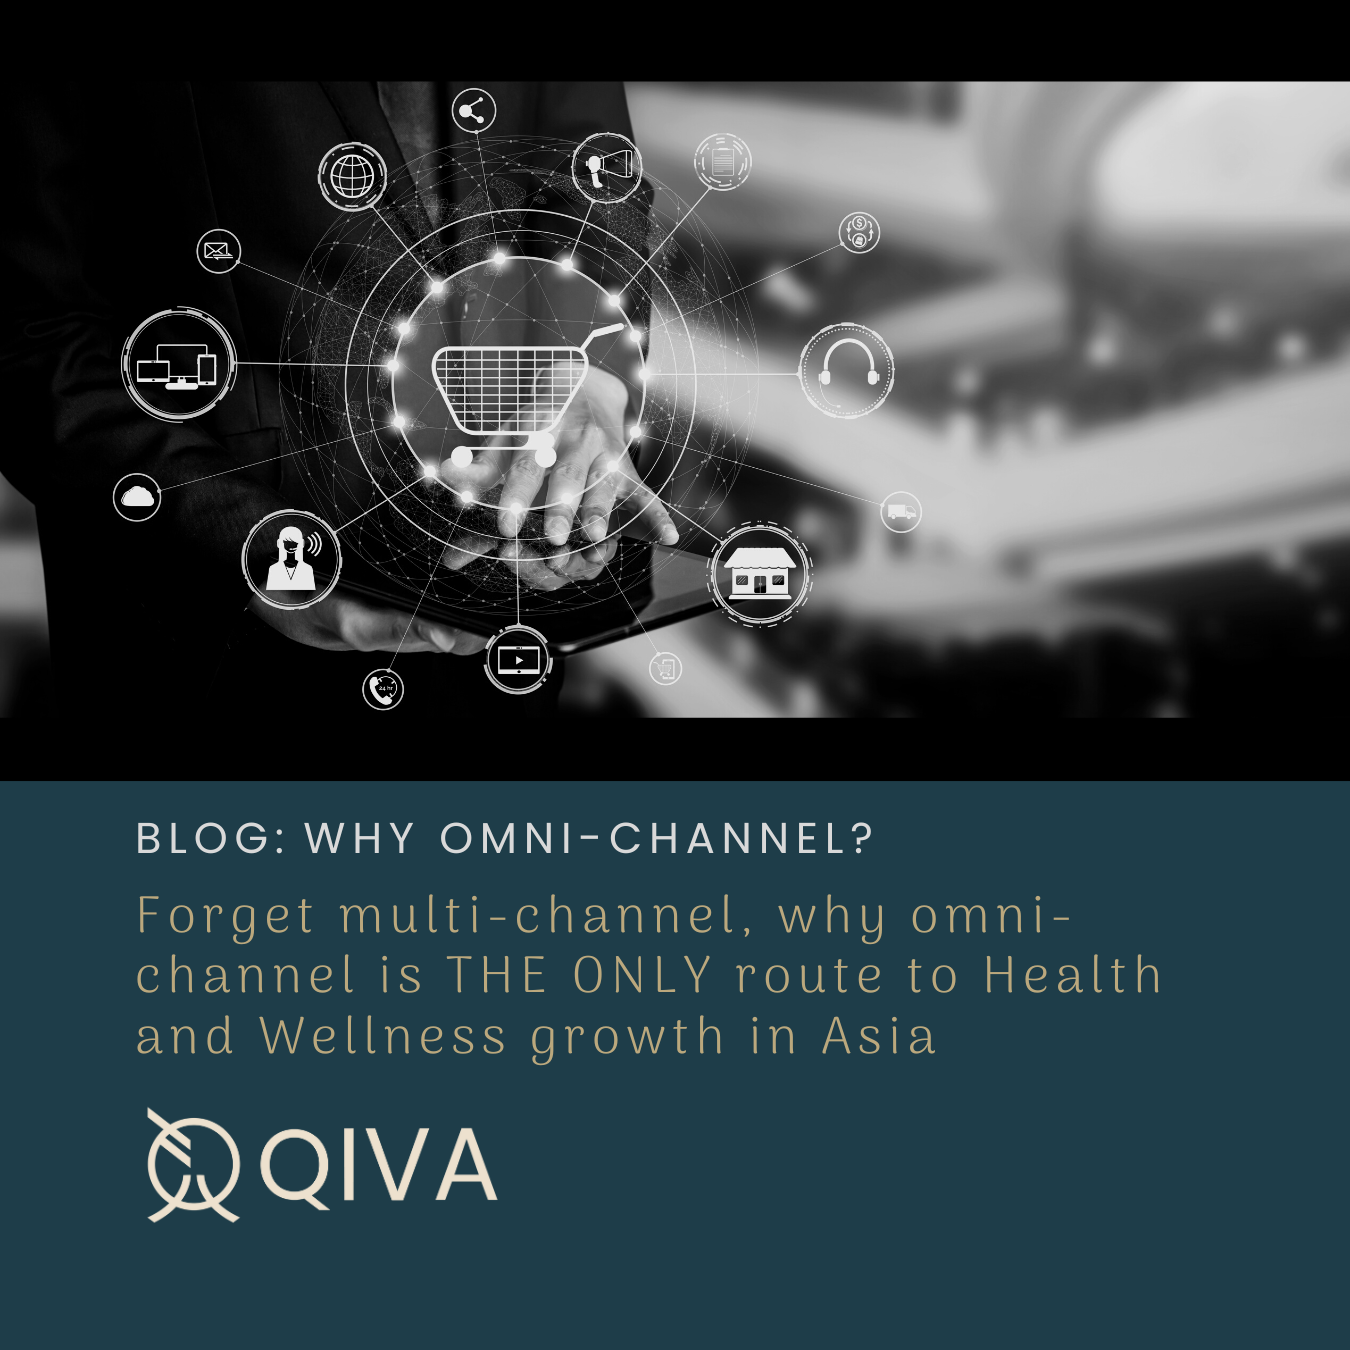 Why omni-channel is THE ONLY route to Health and Wellness growth in Asia